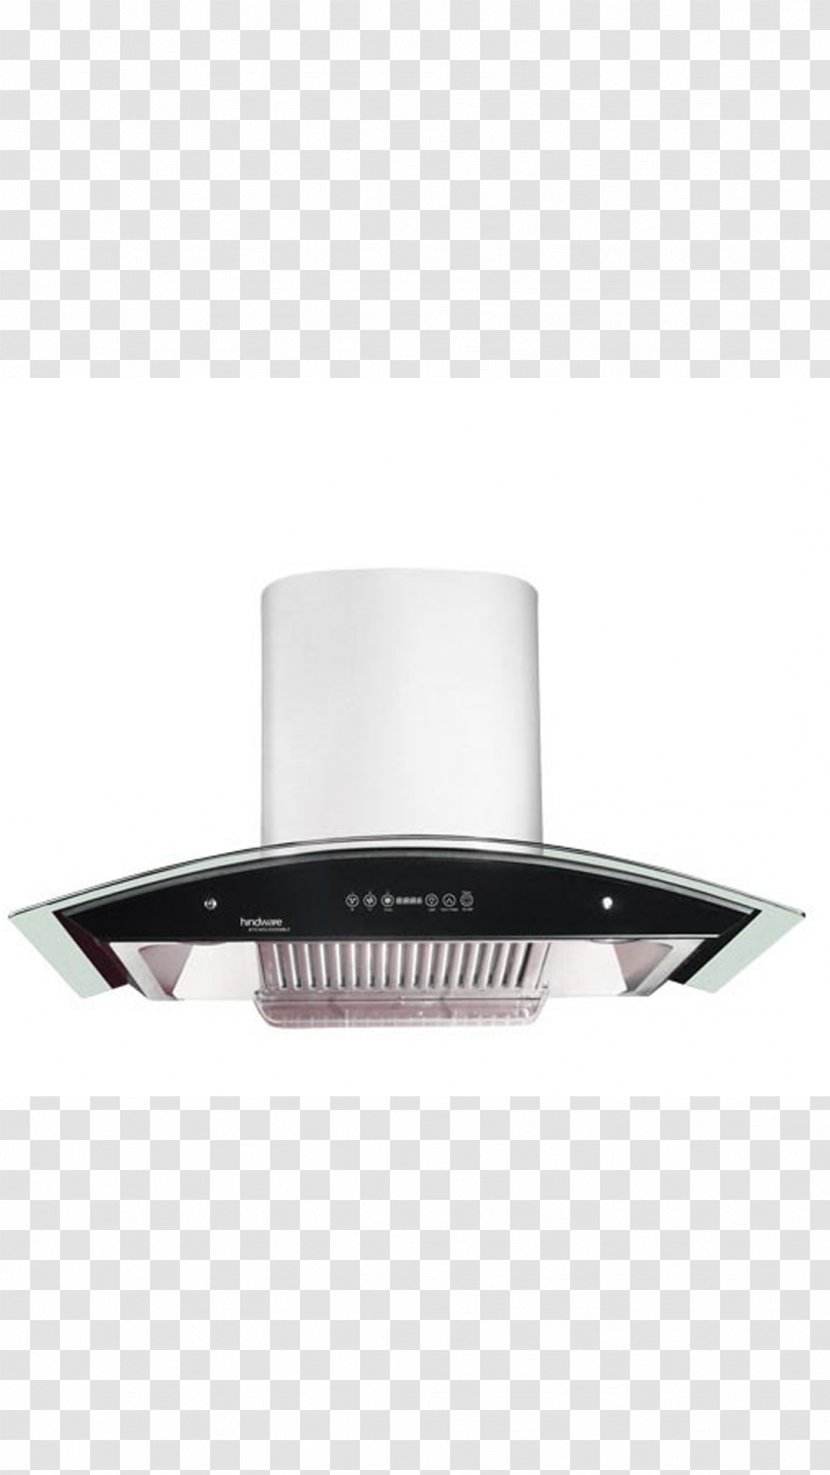 Chimney Sweep IFB Home Appliances Kitchen Oven Transparent PNG